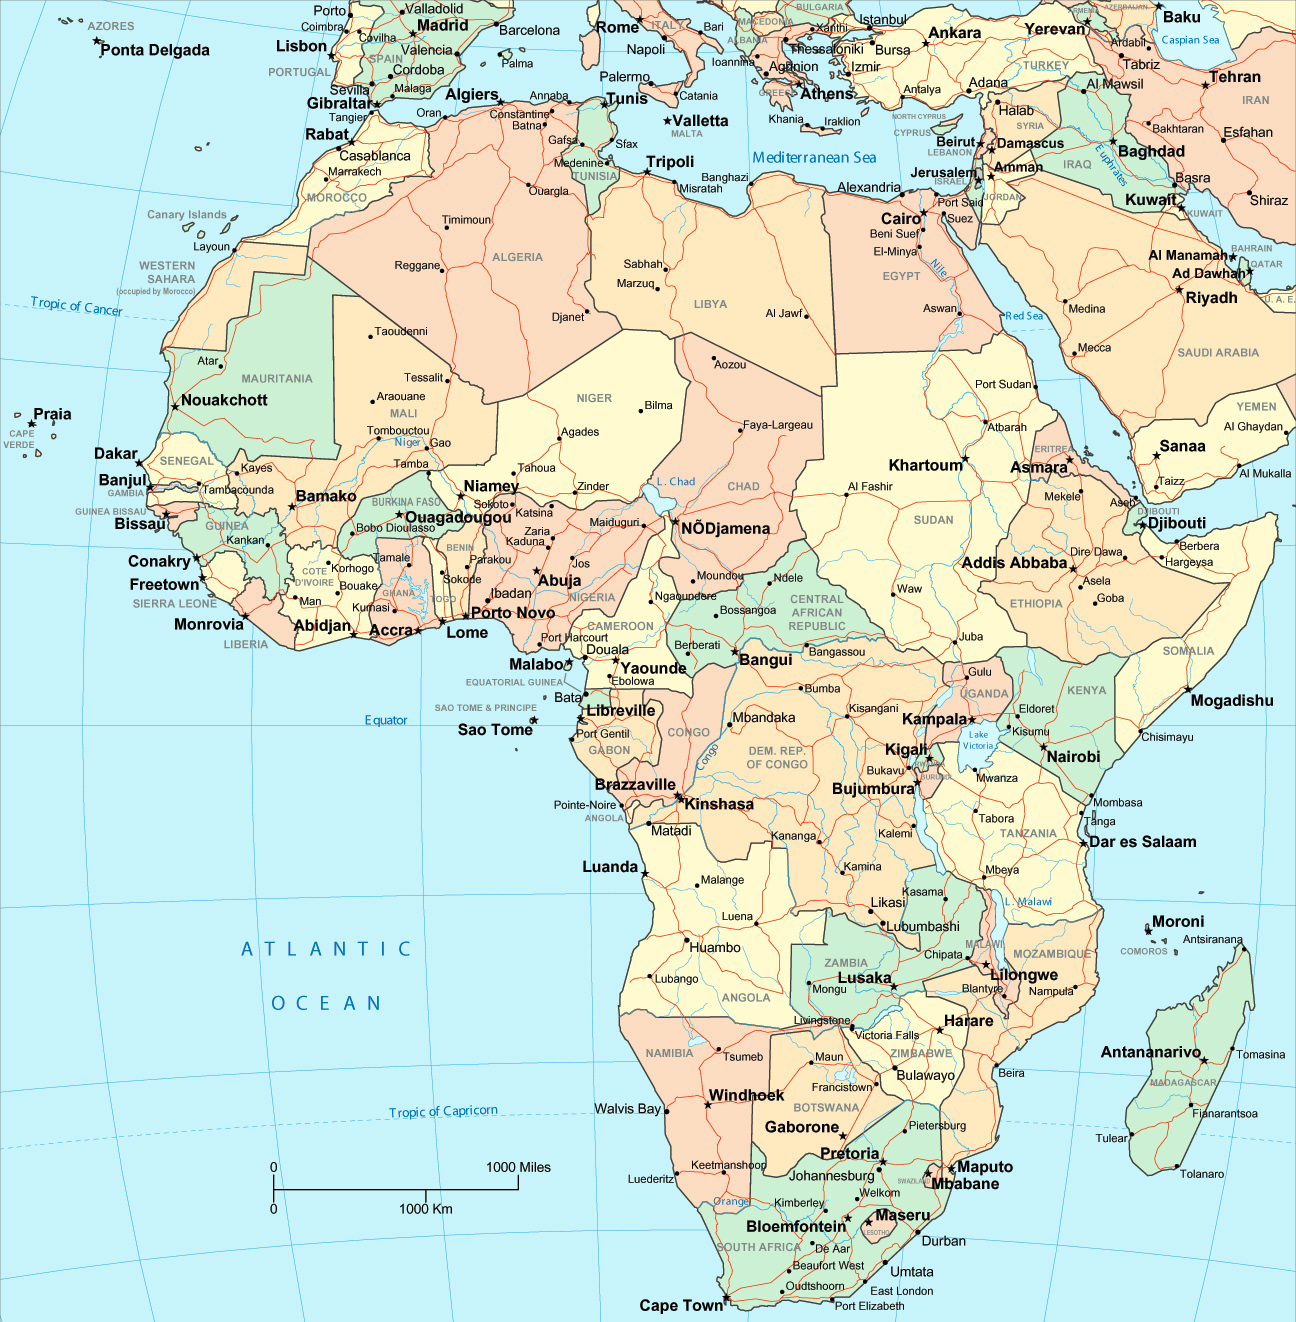 large-detailed-political-map-of-africa-with-major-roads-capitals-and